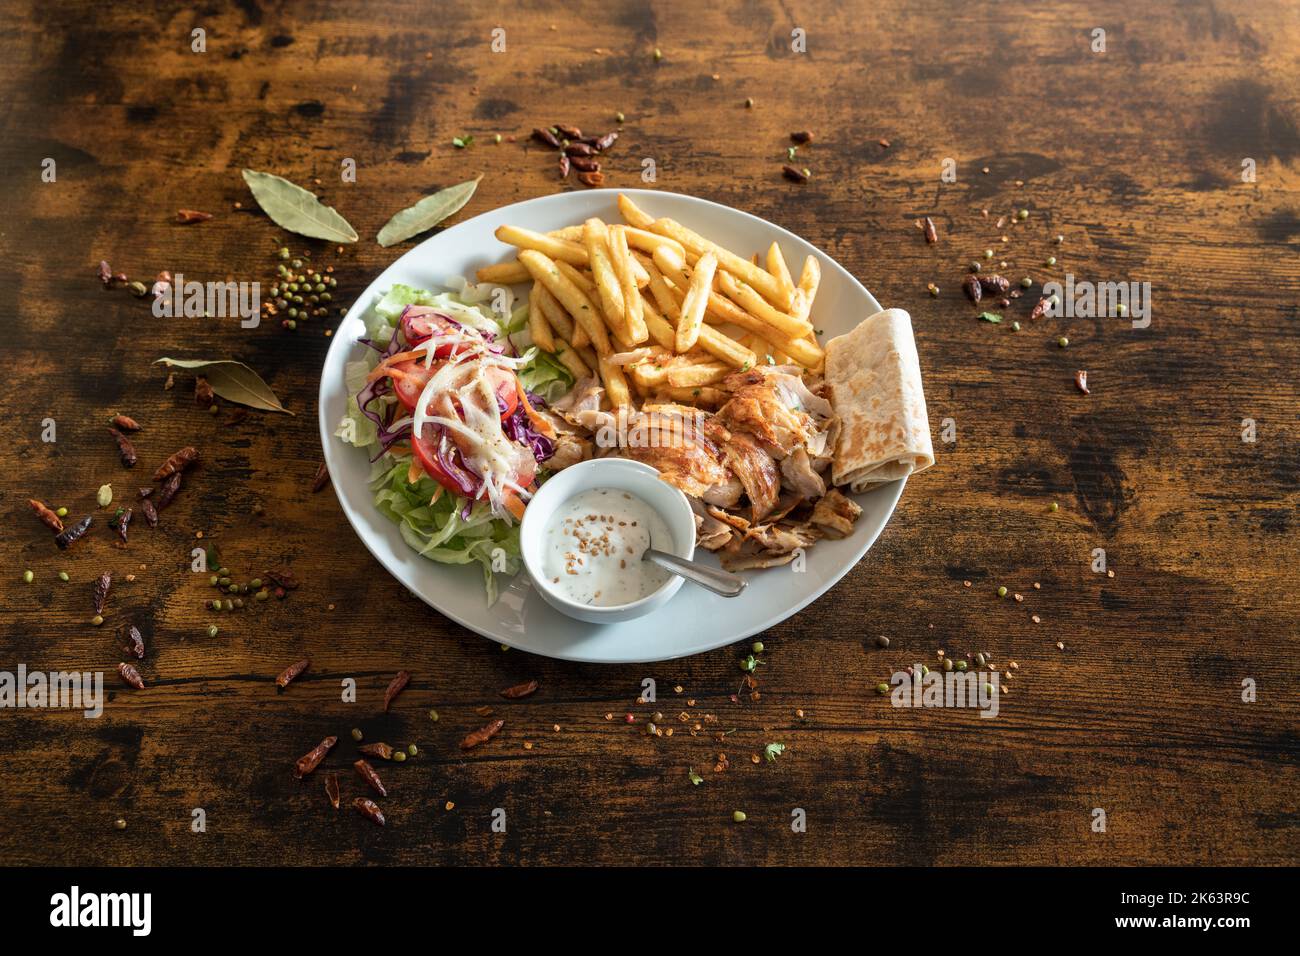 Kebab plate with french frizes and white sauce on a wooden table Stock Photo